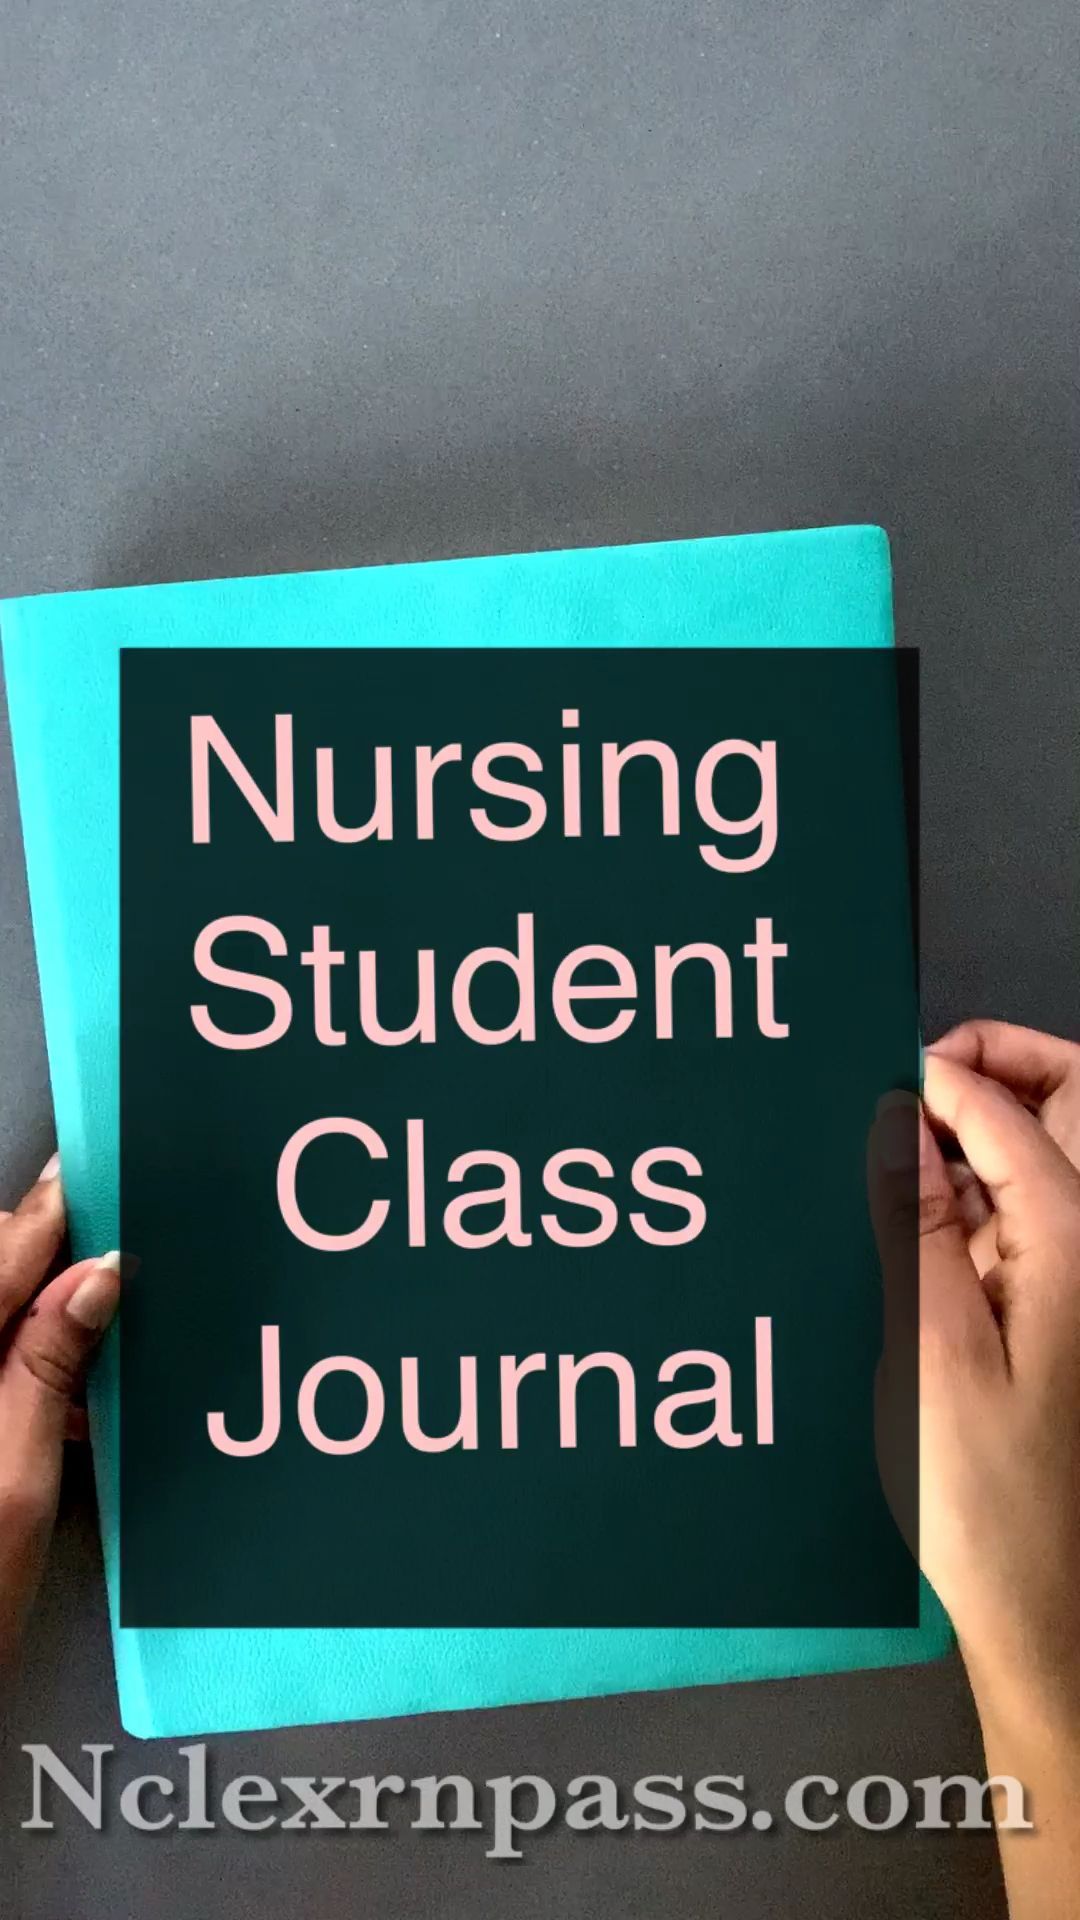 Nursing student class journal for back to school - Nursing student class journal for back to school -   19 diy Organization student ideas